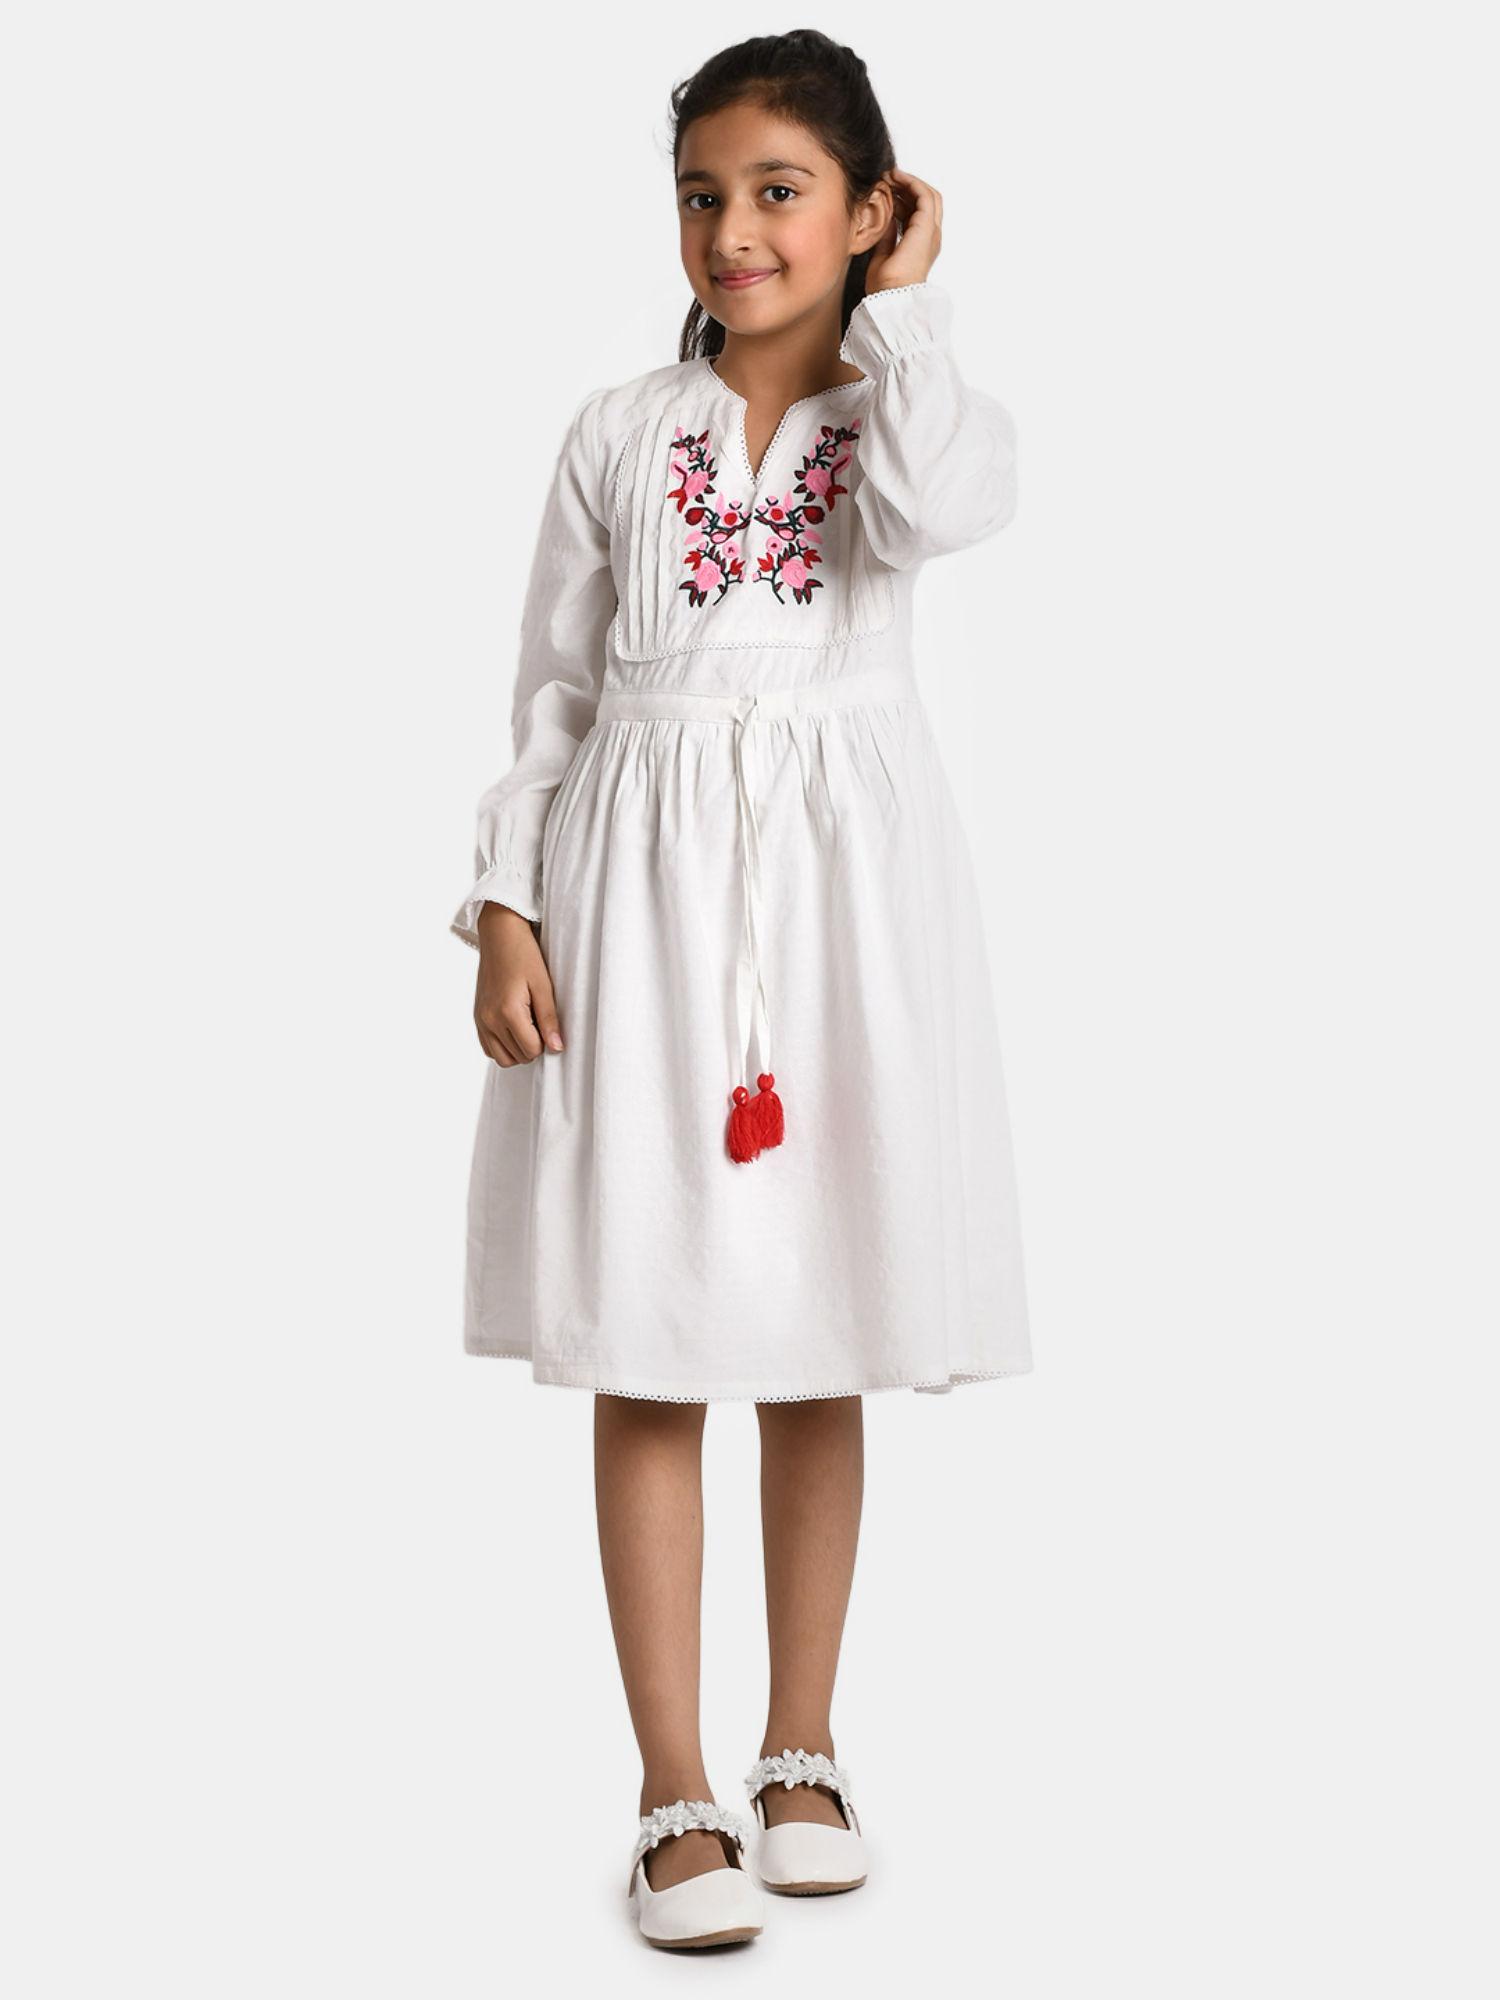 Round Neck Fit & Flair Casual Wear Embroidery Full Sleeve Girls Dress White